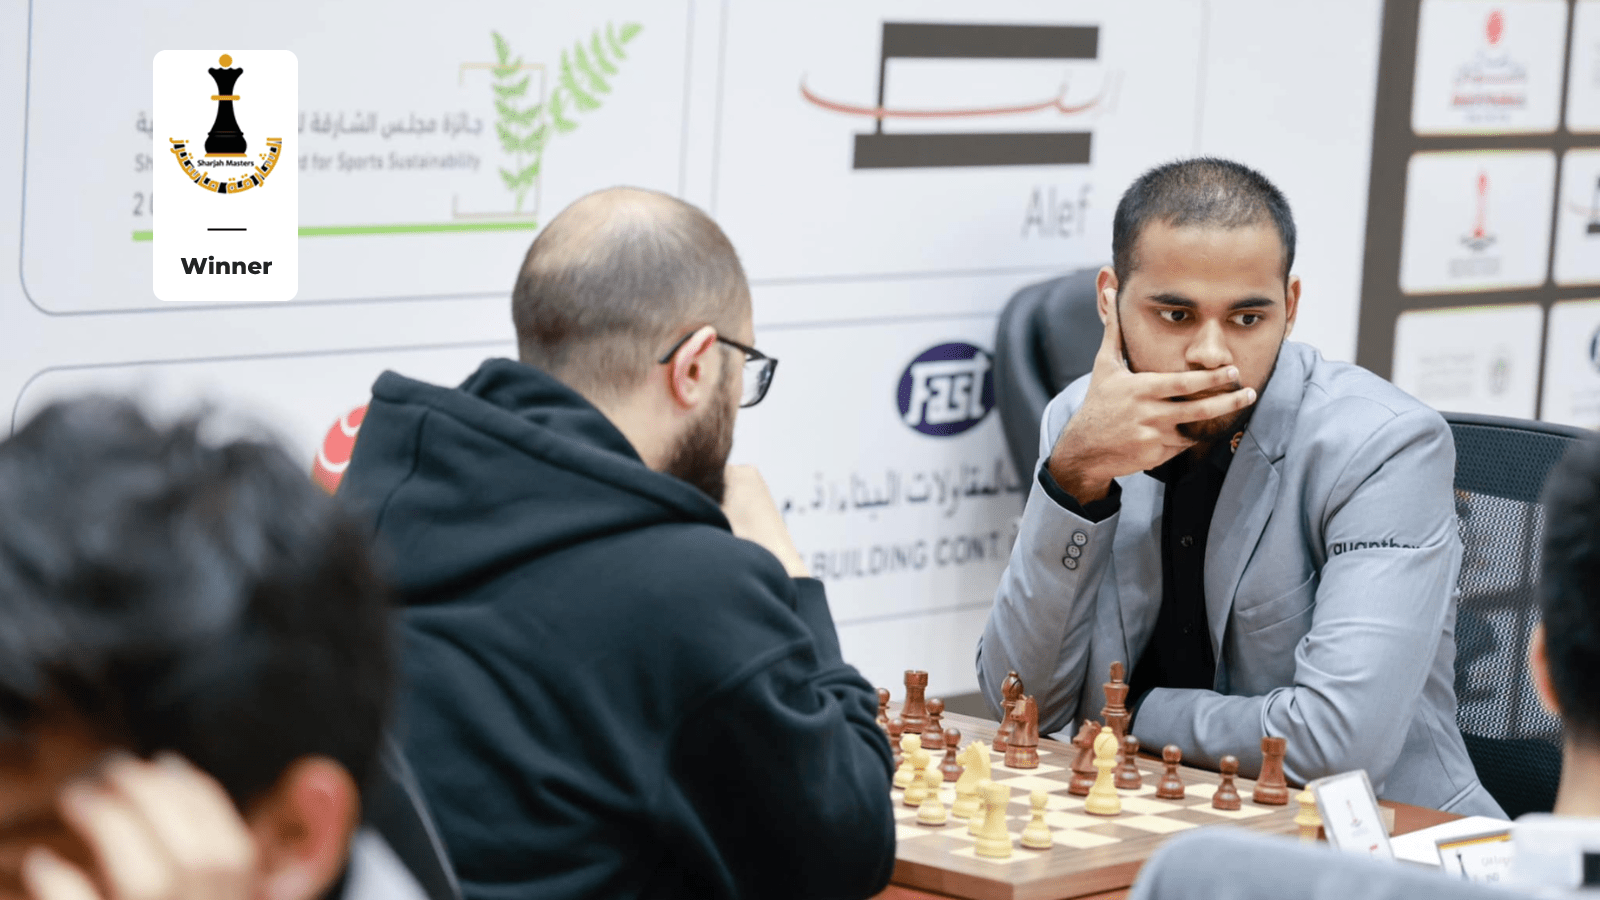 Erigaisi Wins The Sharjah Masters, Touted As Strongest Invitational Open In Chess History